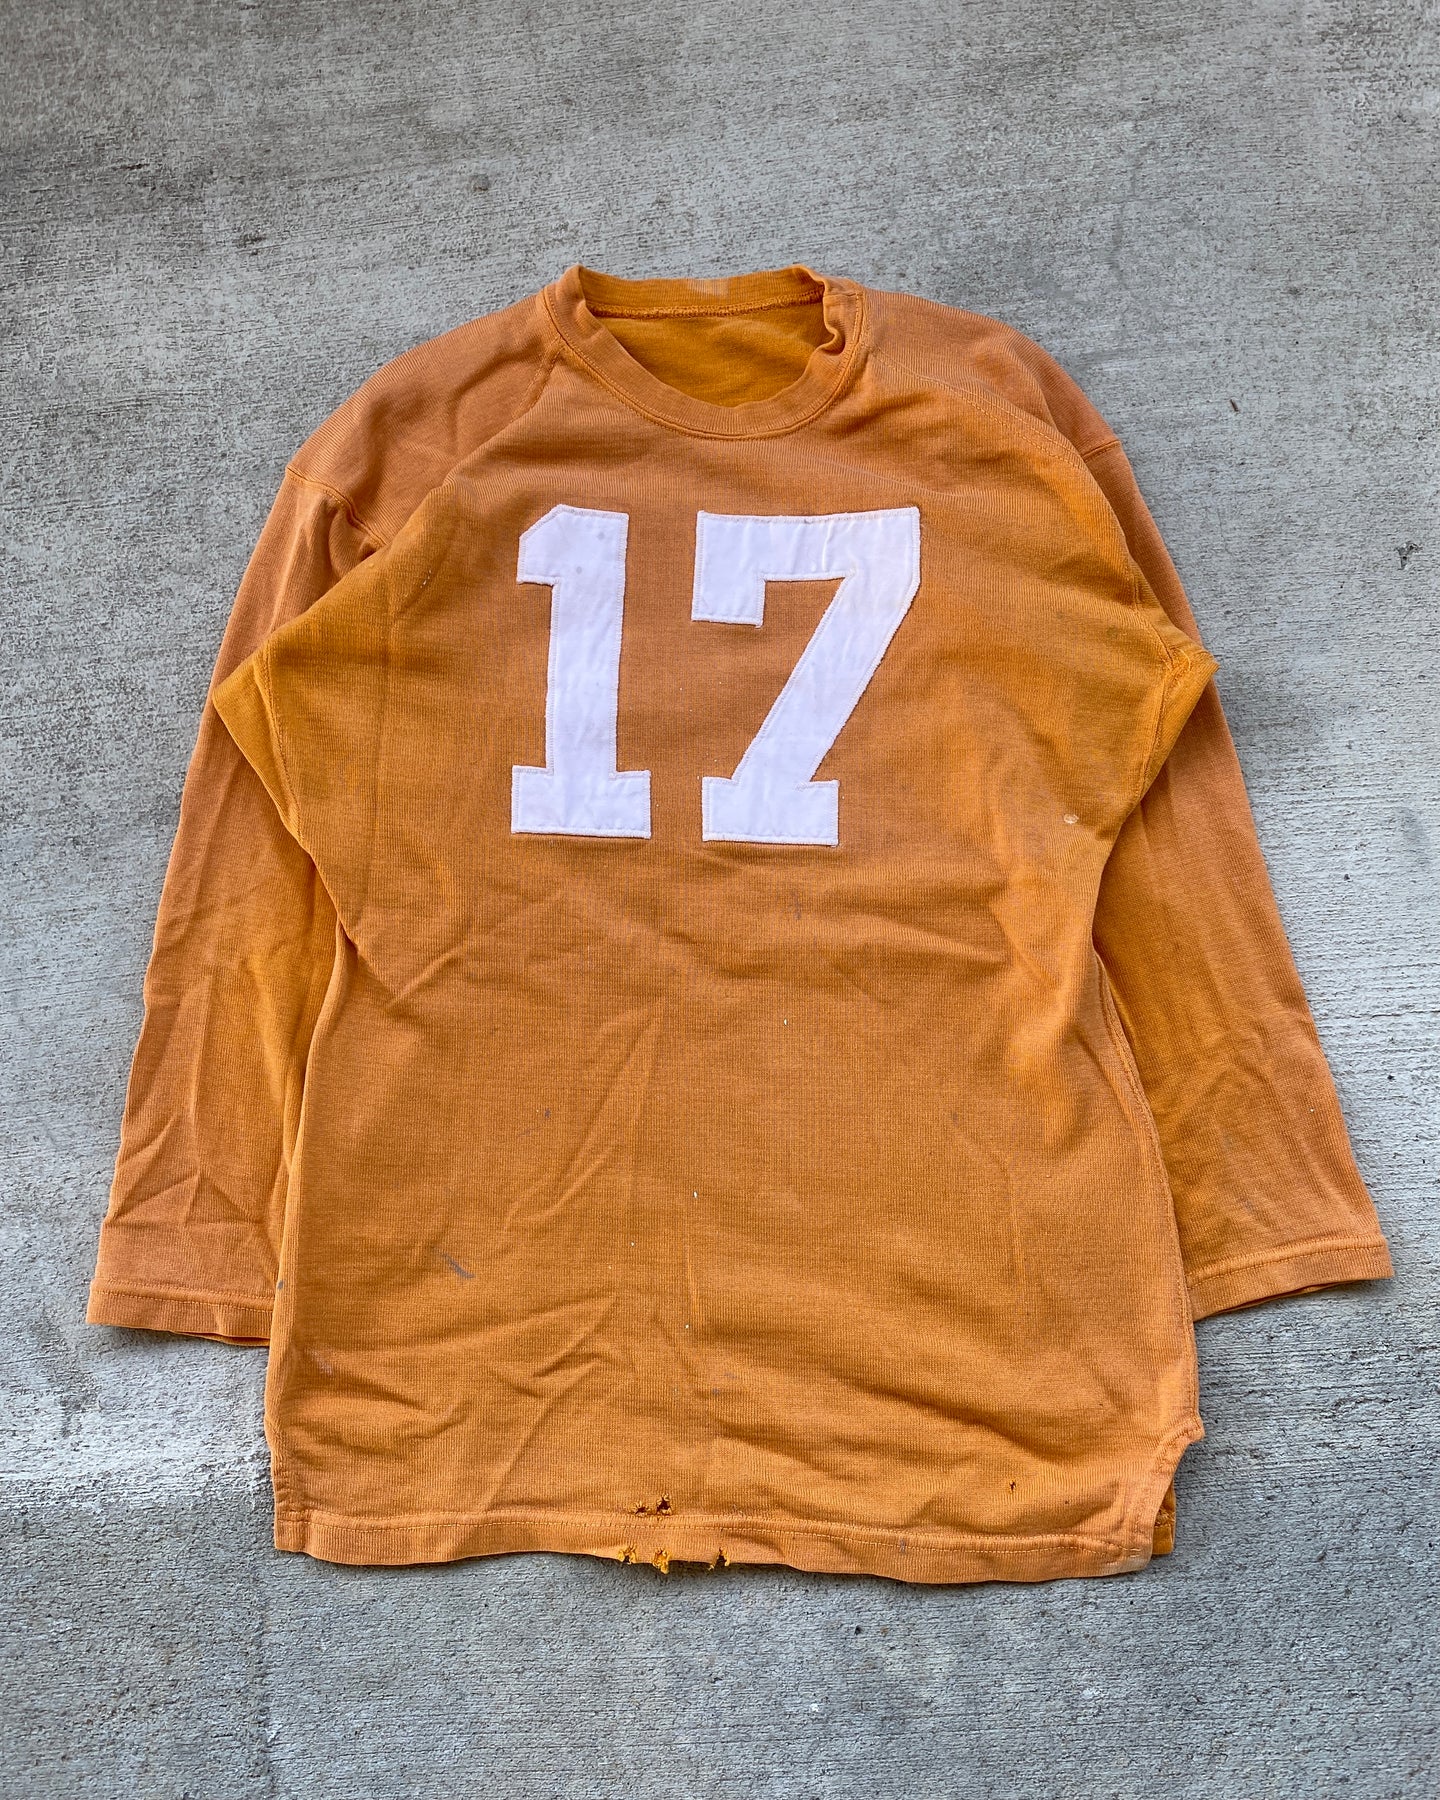 1940s/1950s University of Tennessee Sun Faded Football Shirt - Size M